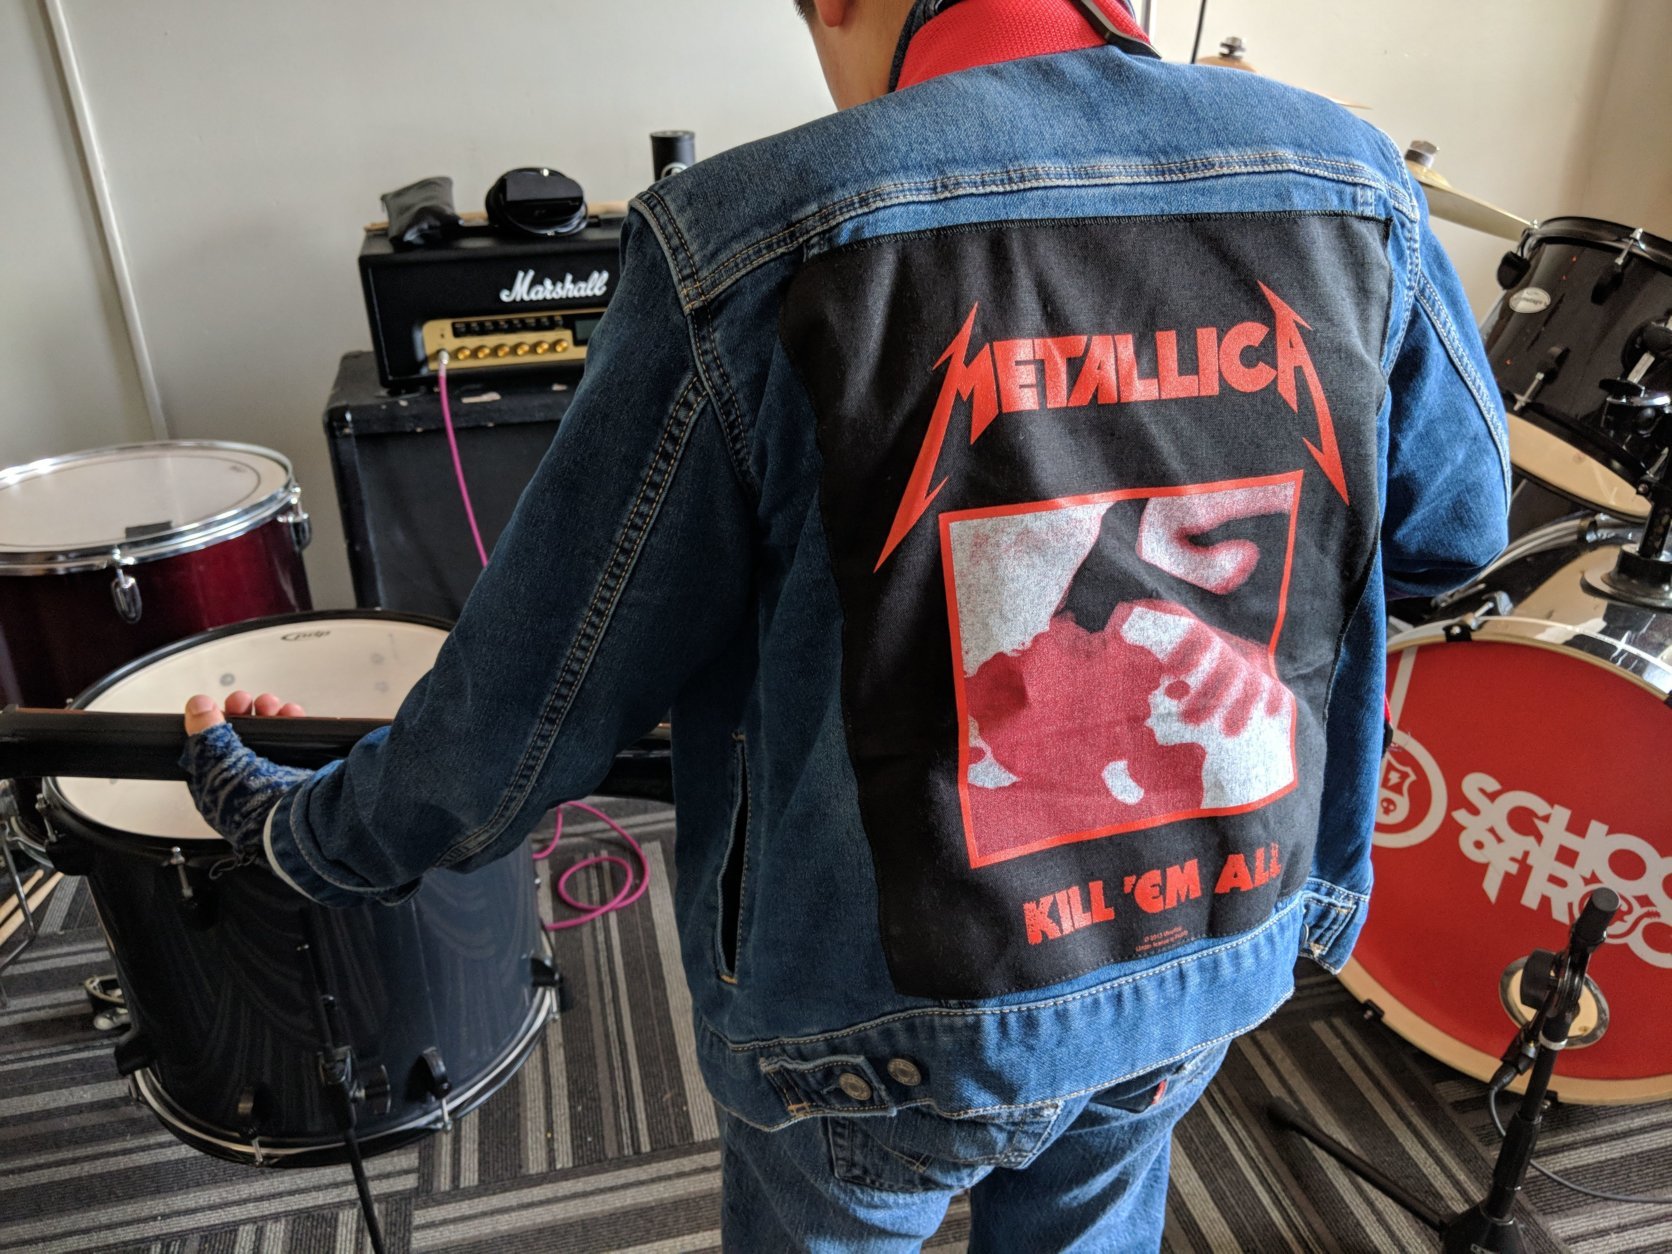 This classic Metallica album came out 35 years ago, but it's new to this bass player. (WTOP/Jack Pointer)